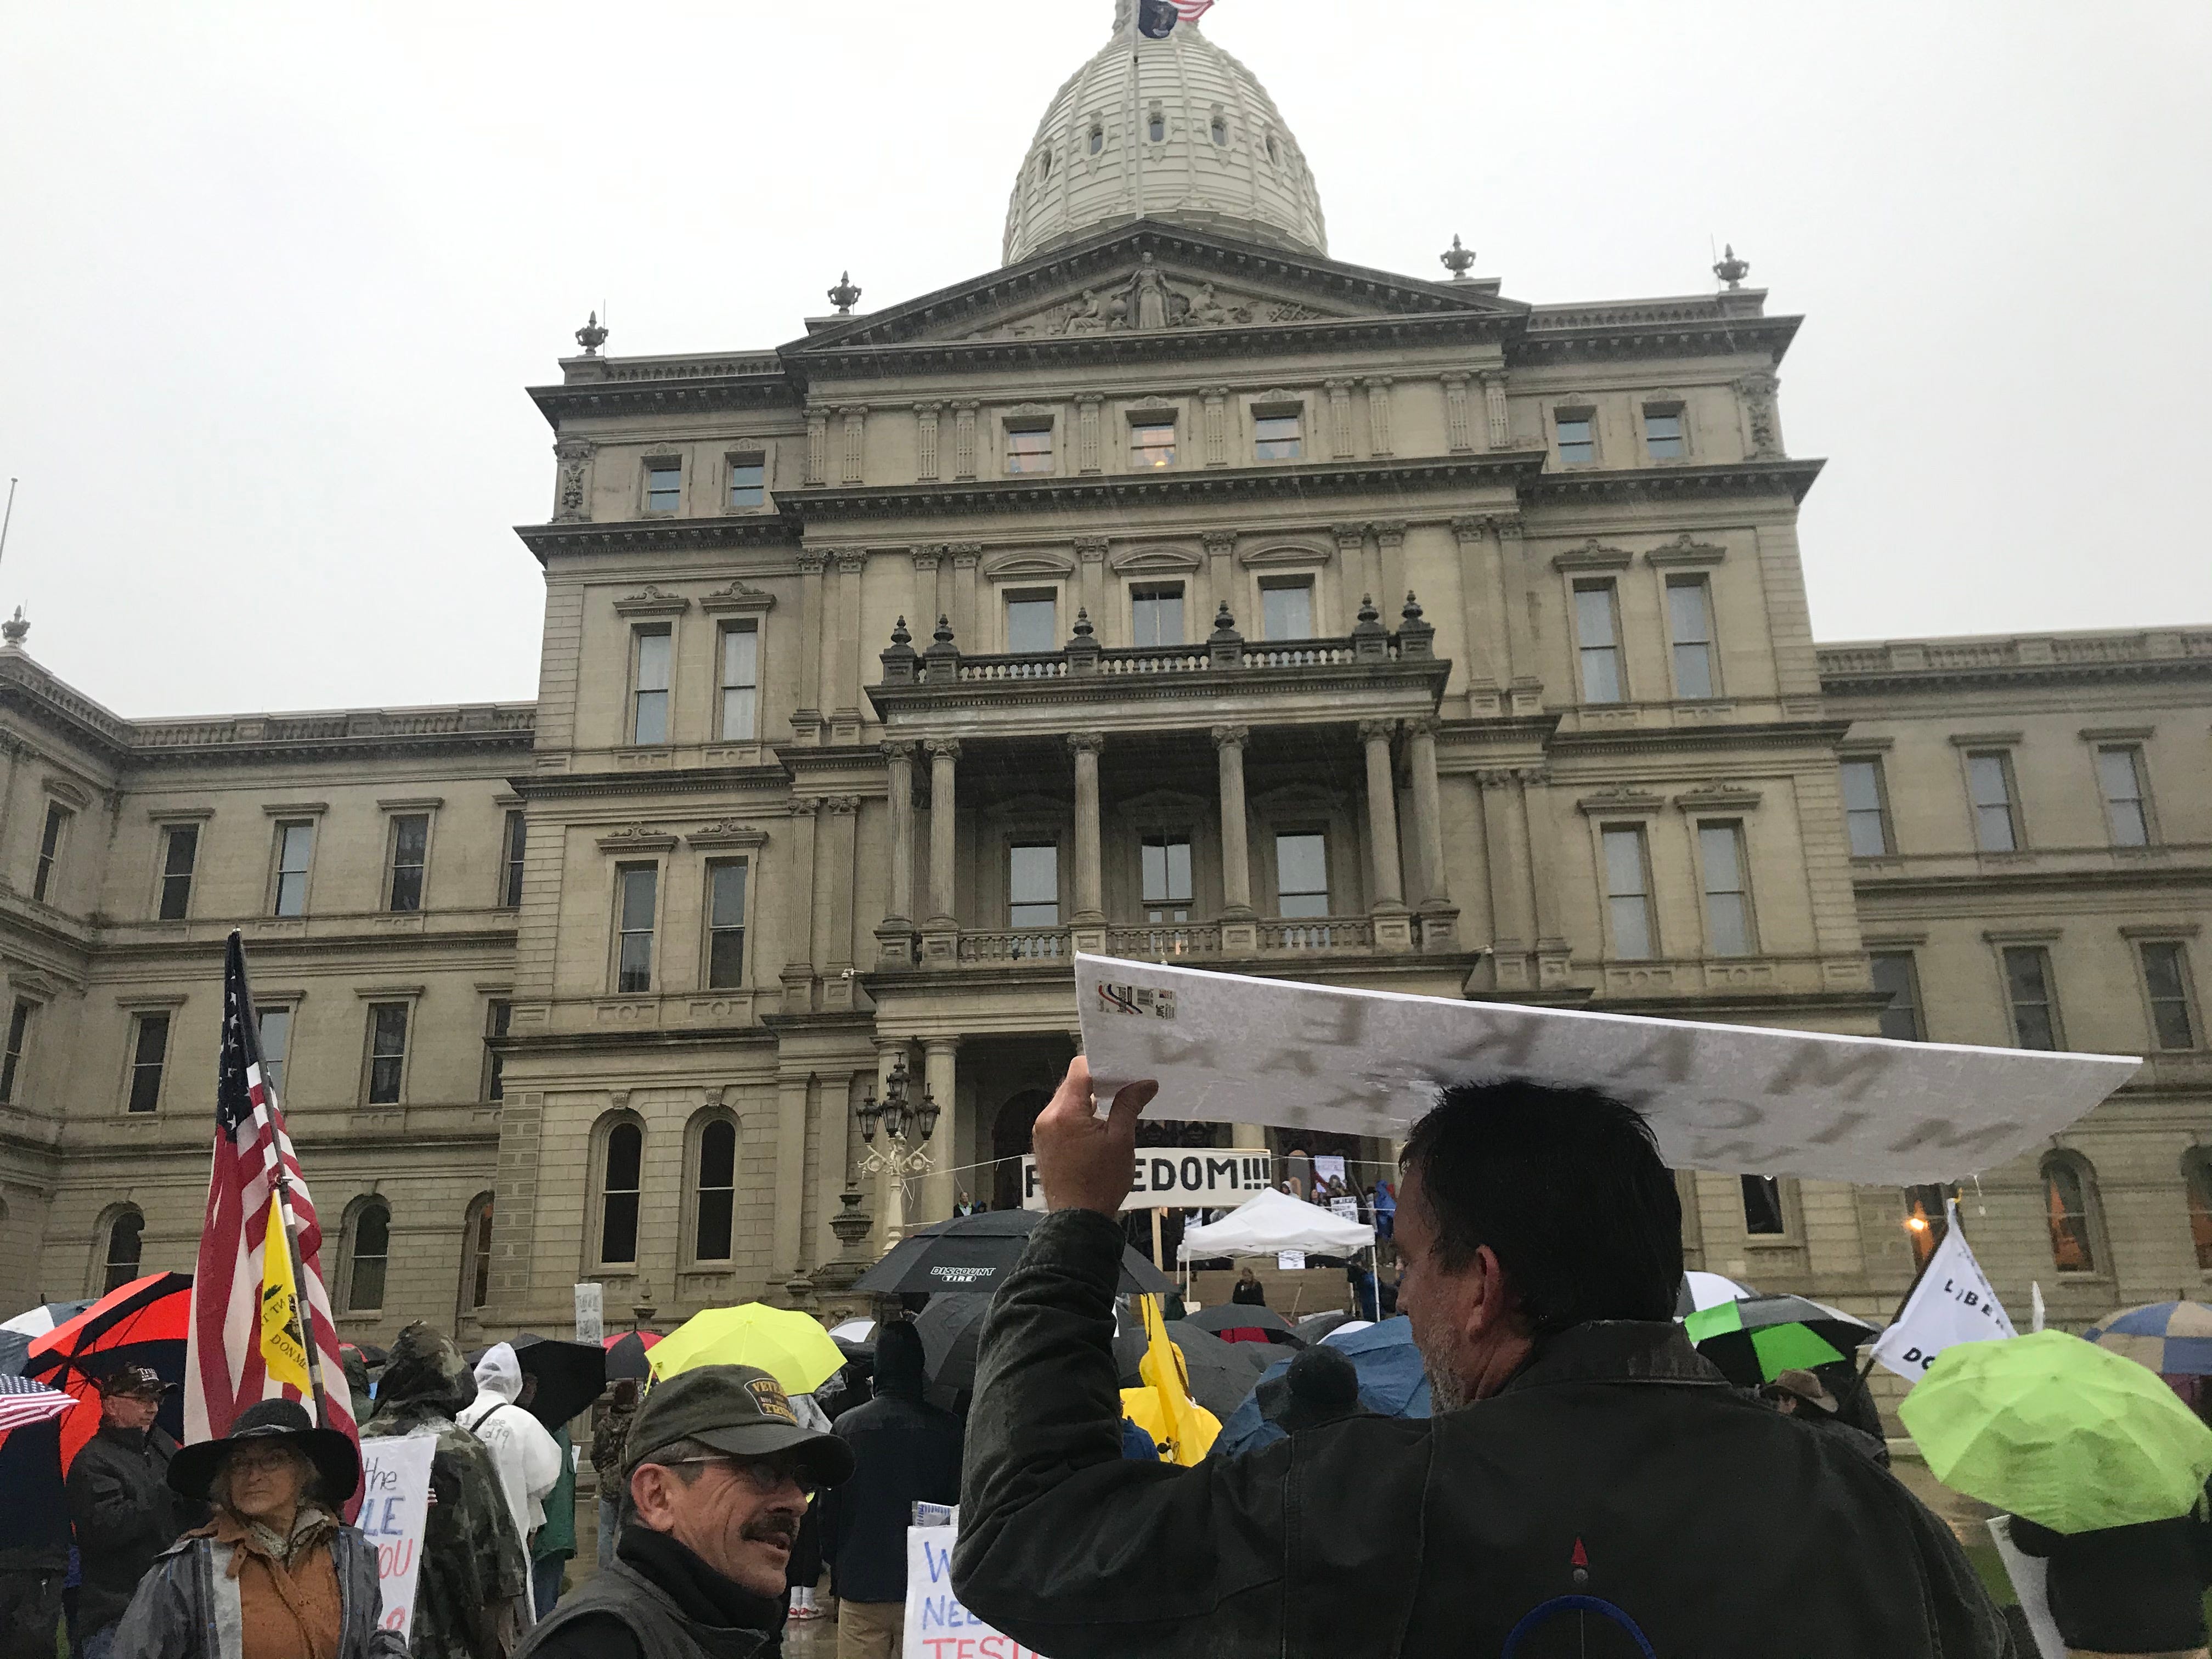 A participant in a protest at the Michigan Capitol on Thursday, May 14, 2020, uses his sign as an umbrella as rain fell on the event.